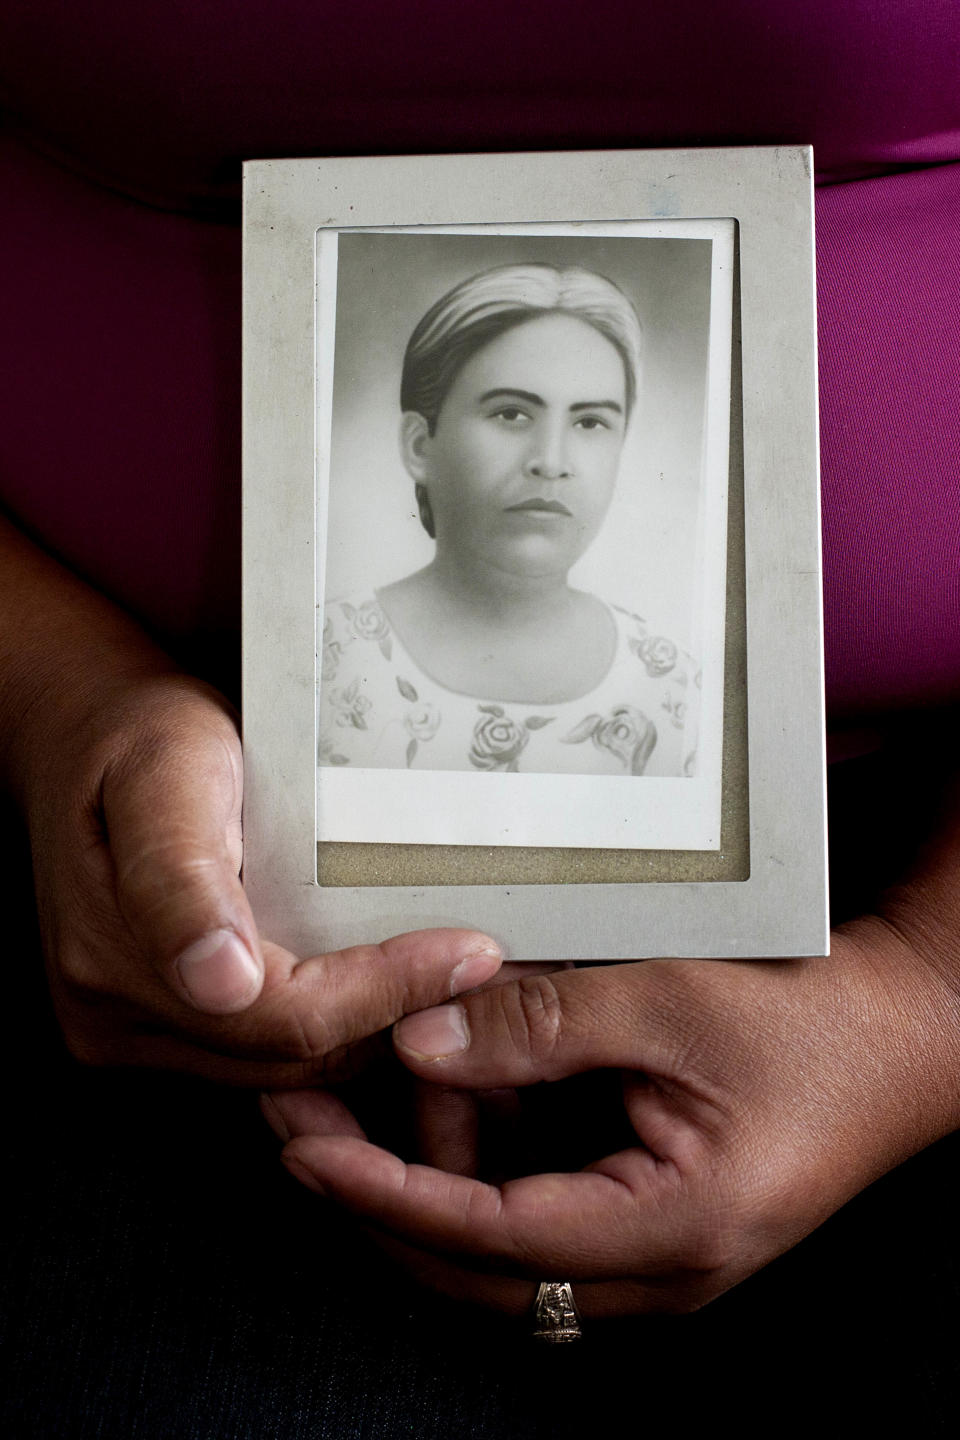 FILE - In this March 12, 2012 file photo, Felicita Romero holds an image of her mother Natividad Ramirez, a victim of the Dos Erres massacre, as she attends the trial of Pedro Pimentel Rios a former member of an elite Guatemalan military force known as the "kaibiles," at a court in Guatemala City. Jorge Sosa, a former Guatemalan army second lieutenant of the "kaibiles", suspected of participating in the killing at least 160 people in the Dos Erres village more than three decades ago, was sentenced in an American court on Monday, to up to a decade in prison for lying on his U.S. citizenship papers about his alleged role in the slayings. (AP Photo/Moises Castillo, File)